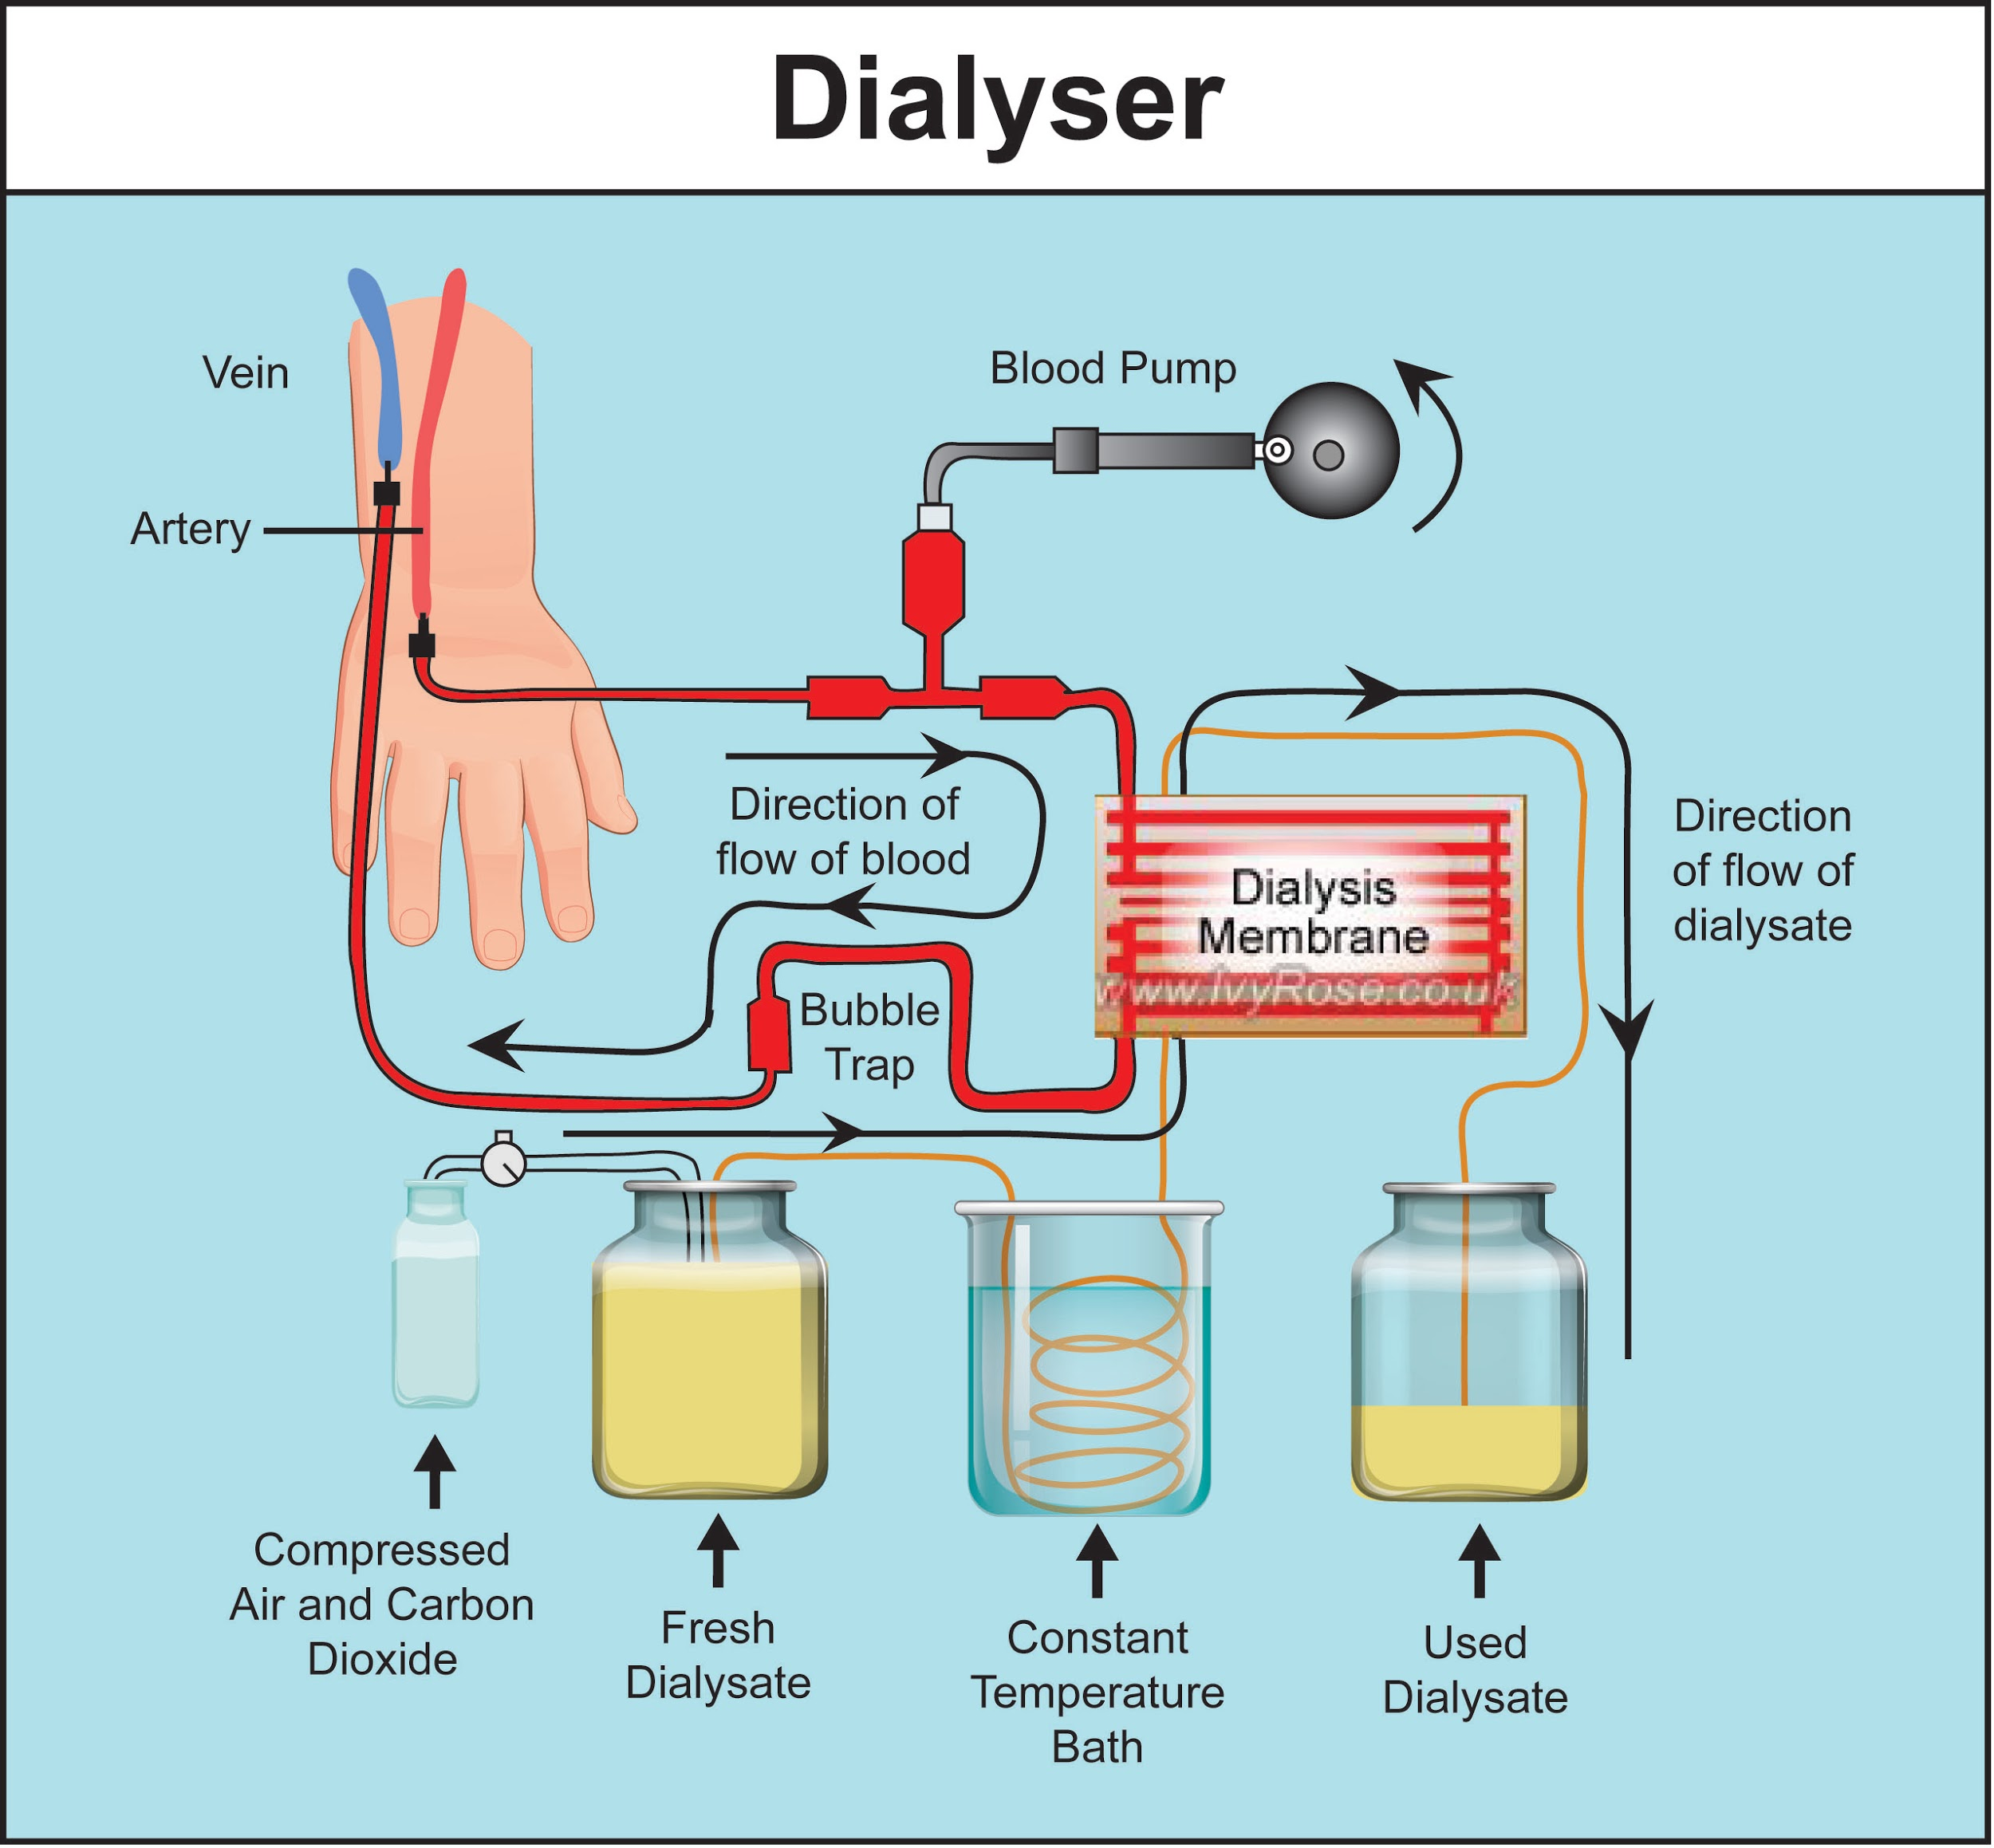 assertionin-dialyzer-the-plasma-protein-of-the-blood-cannot-be